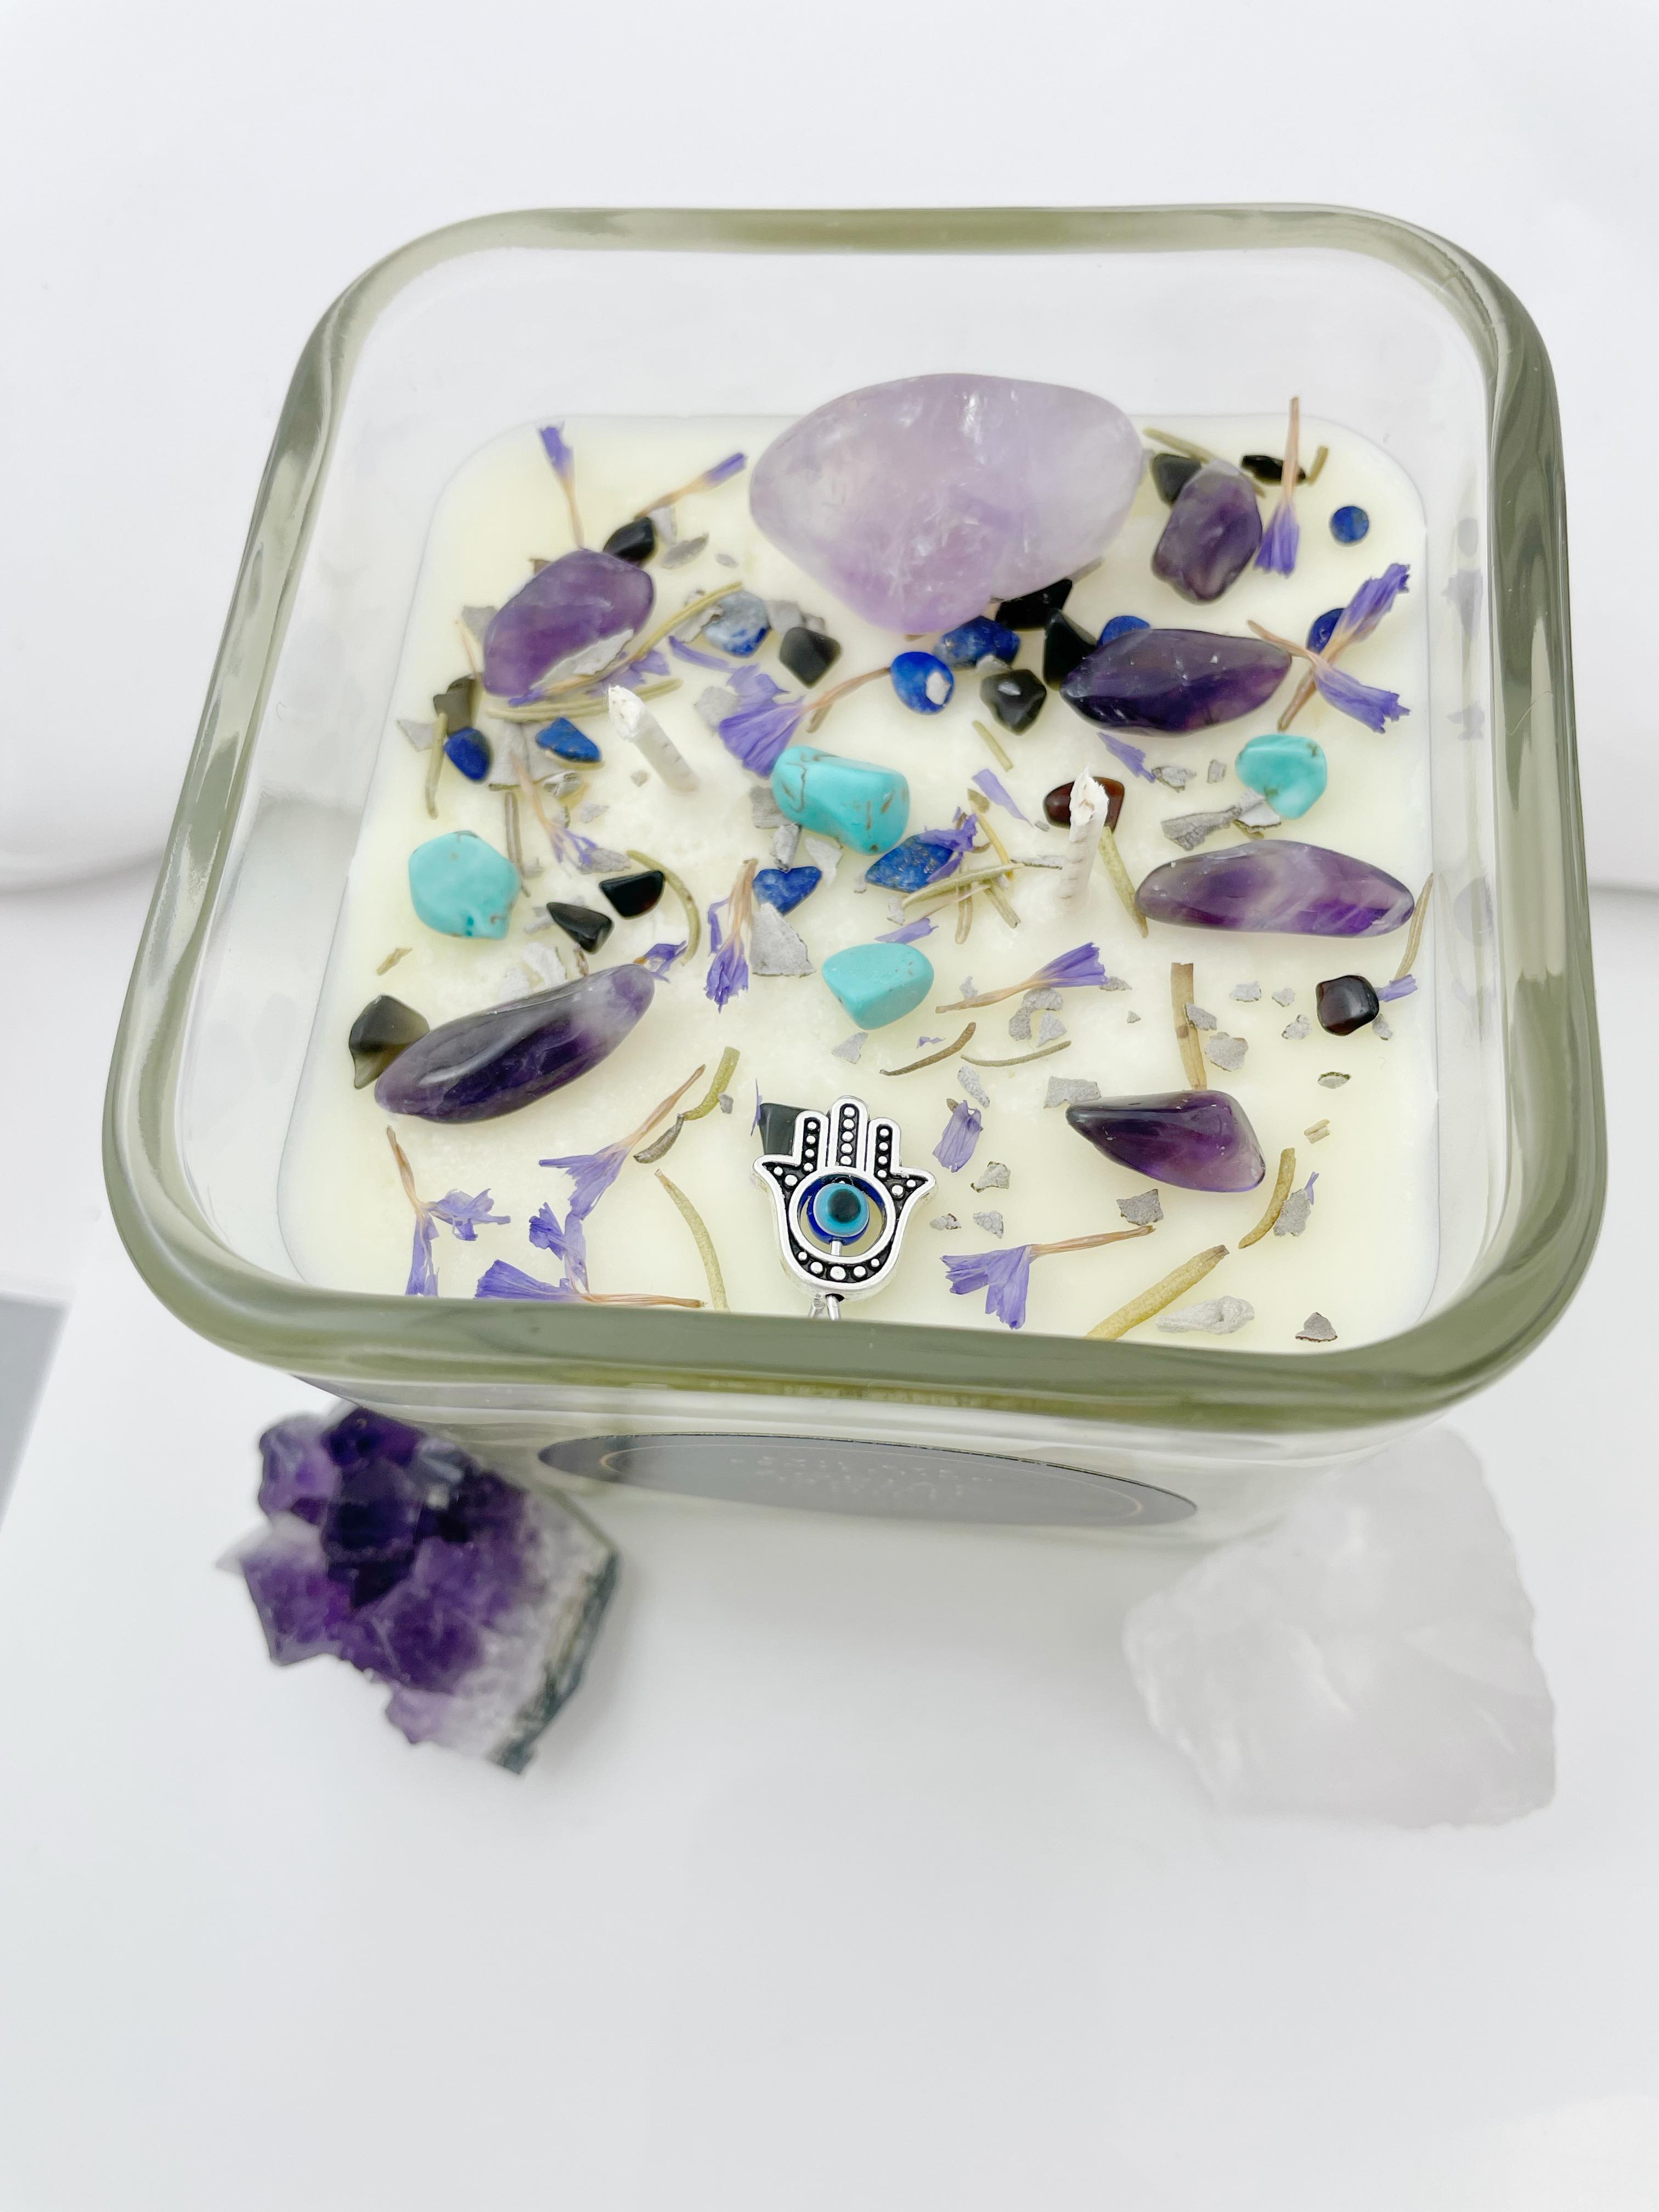 Evil Eye Protection Crystal Candle